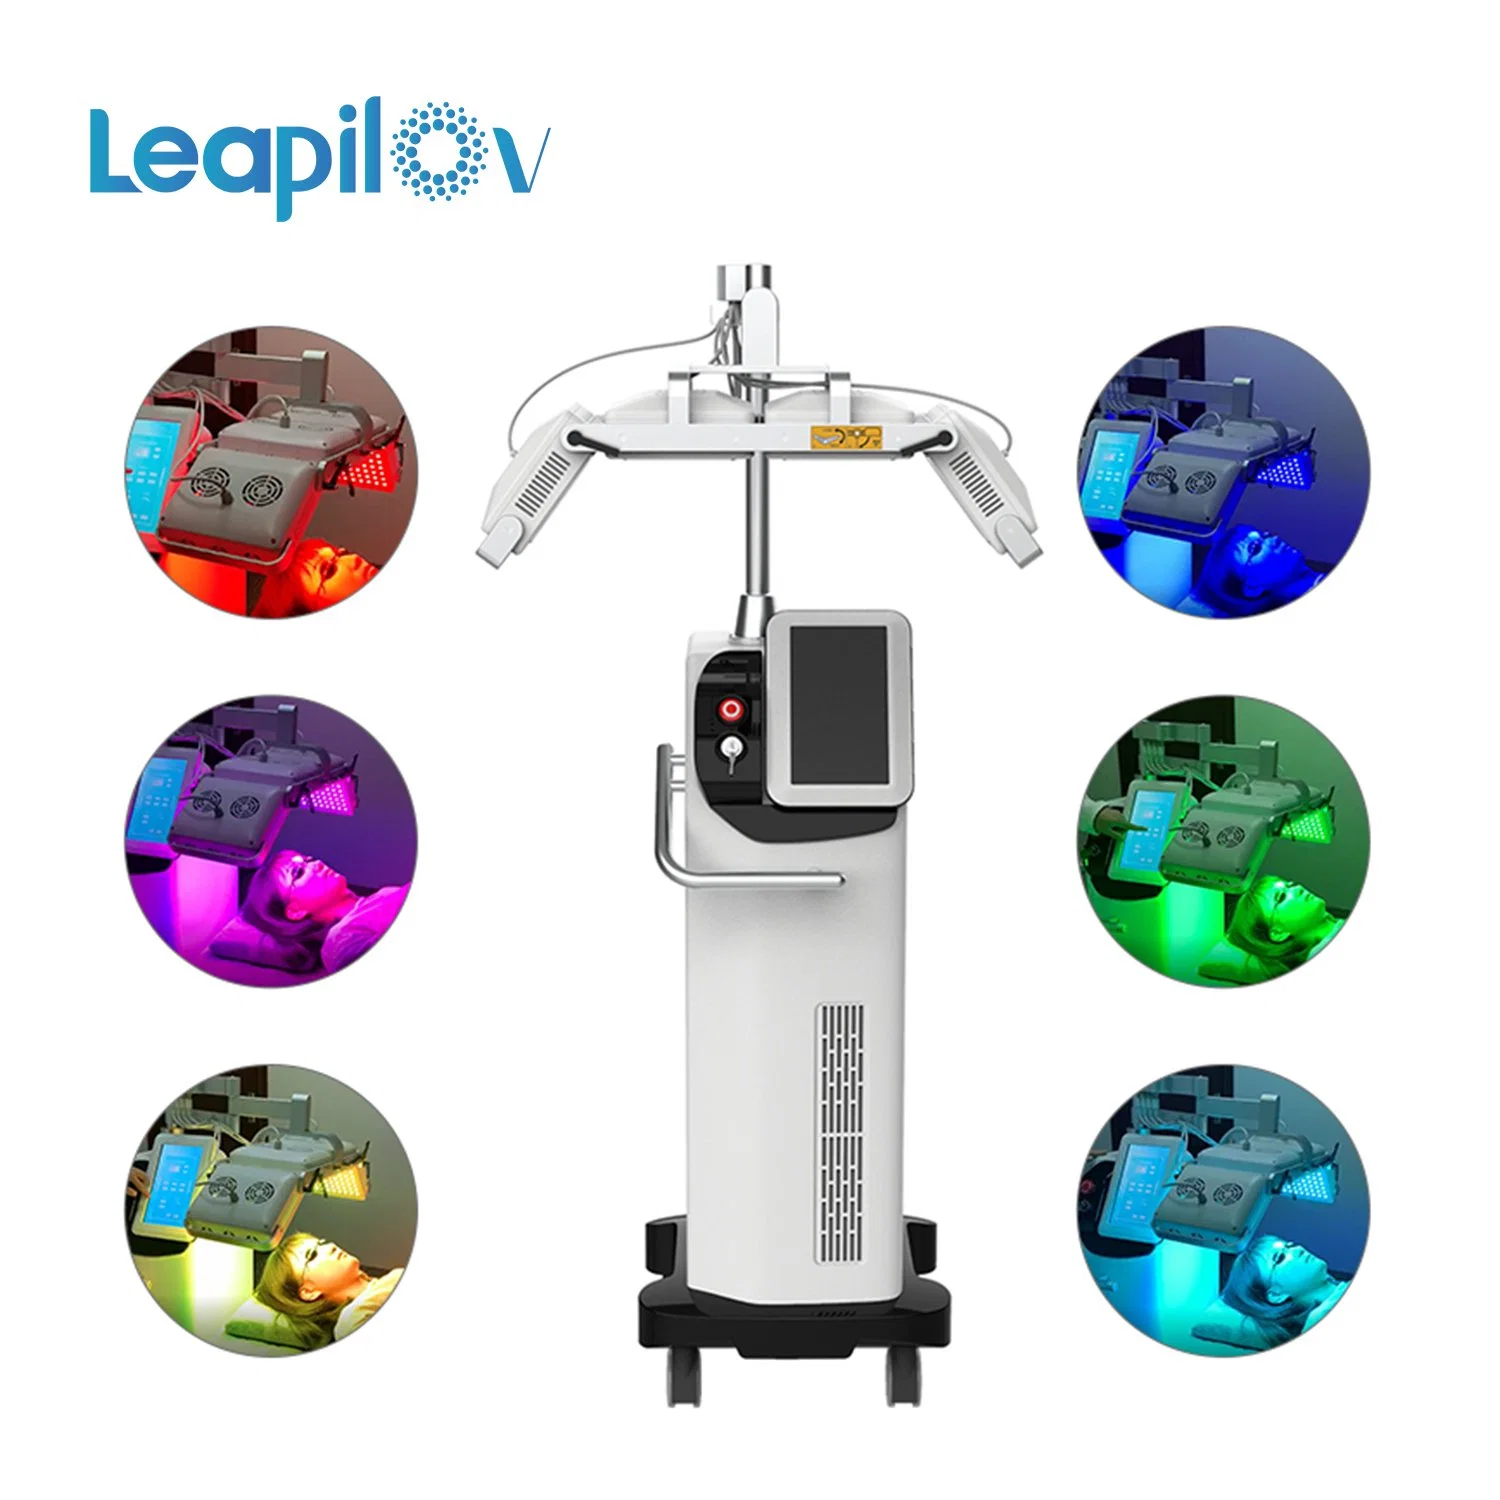 Medical Beauty Facial PDT Therapy LED Lamps Skin Whitening Machine Skin Rejuvenation Anti-Aging Phototherapy Skin Beauty